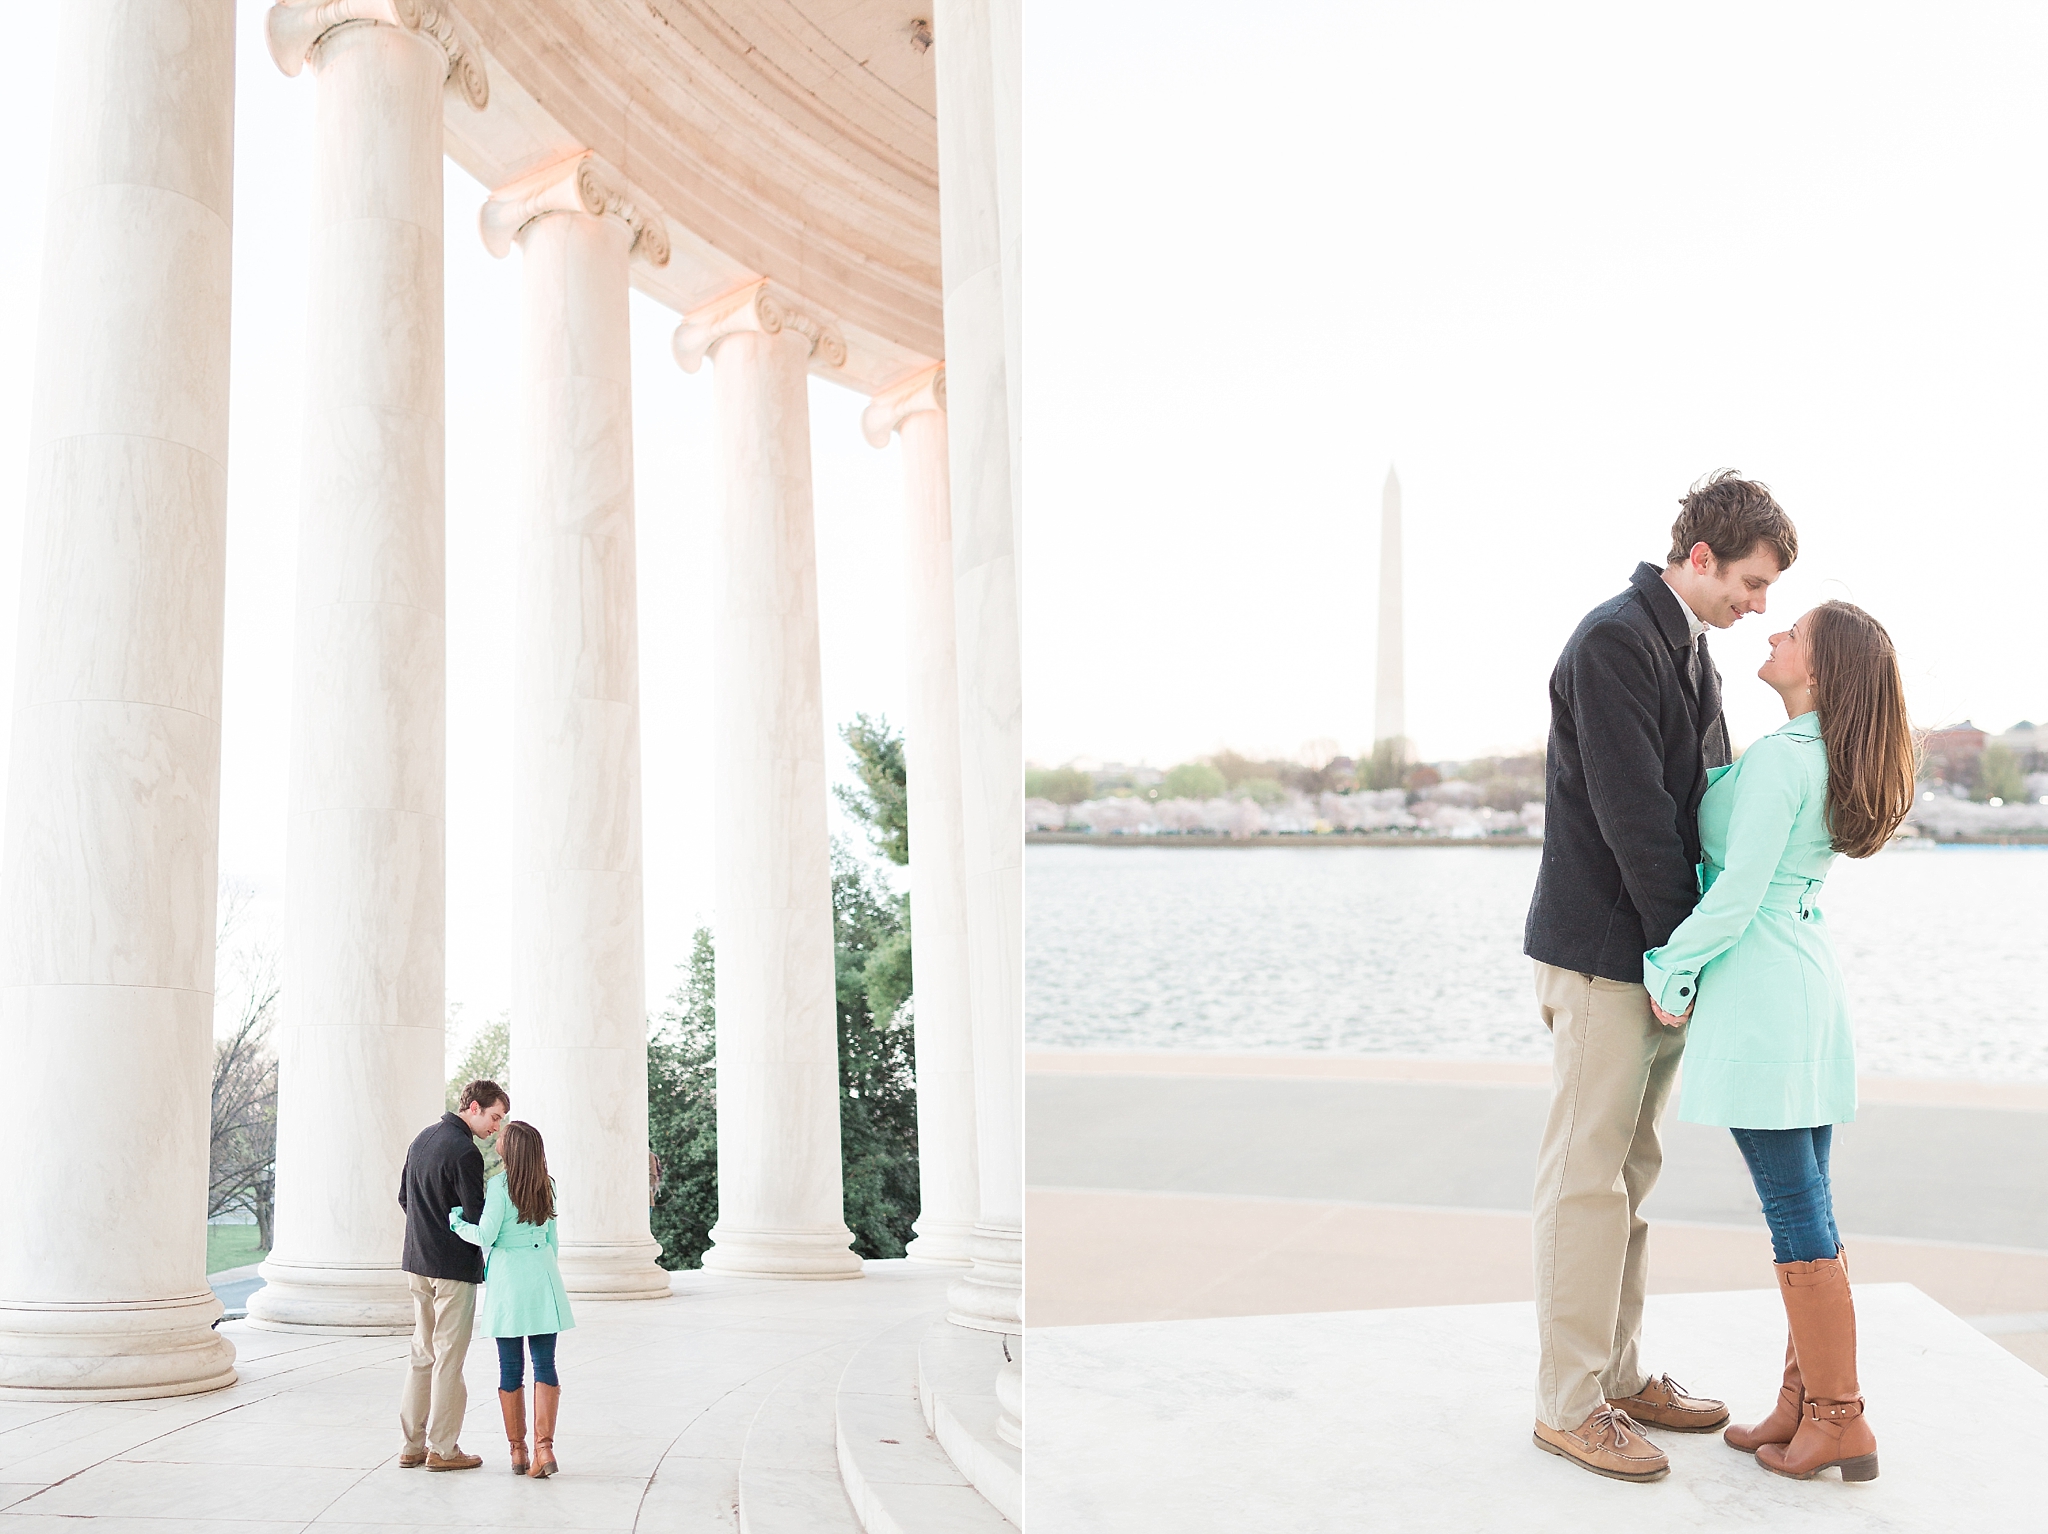 Washington, DC wedding and anniversary photographer, Alicia Lacey, takes a look back on the best anniversary portraits of the 2016 season.